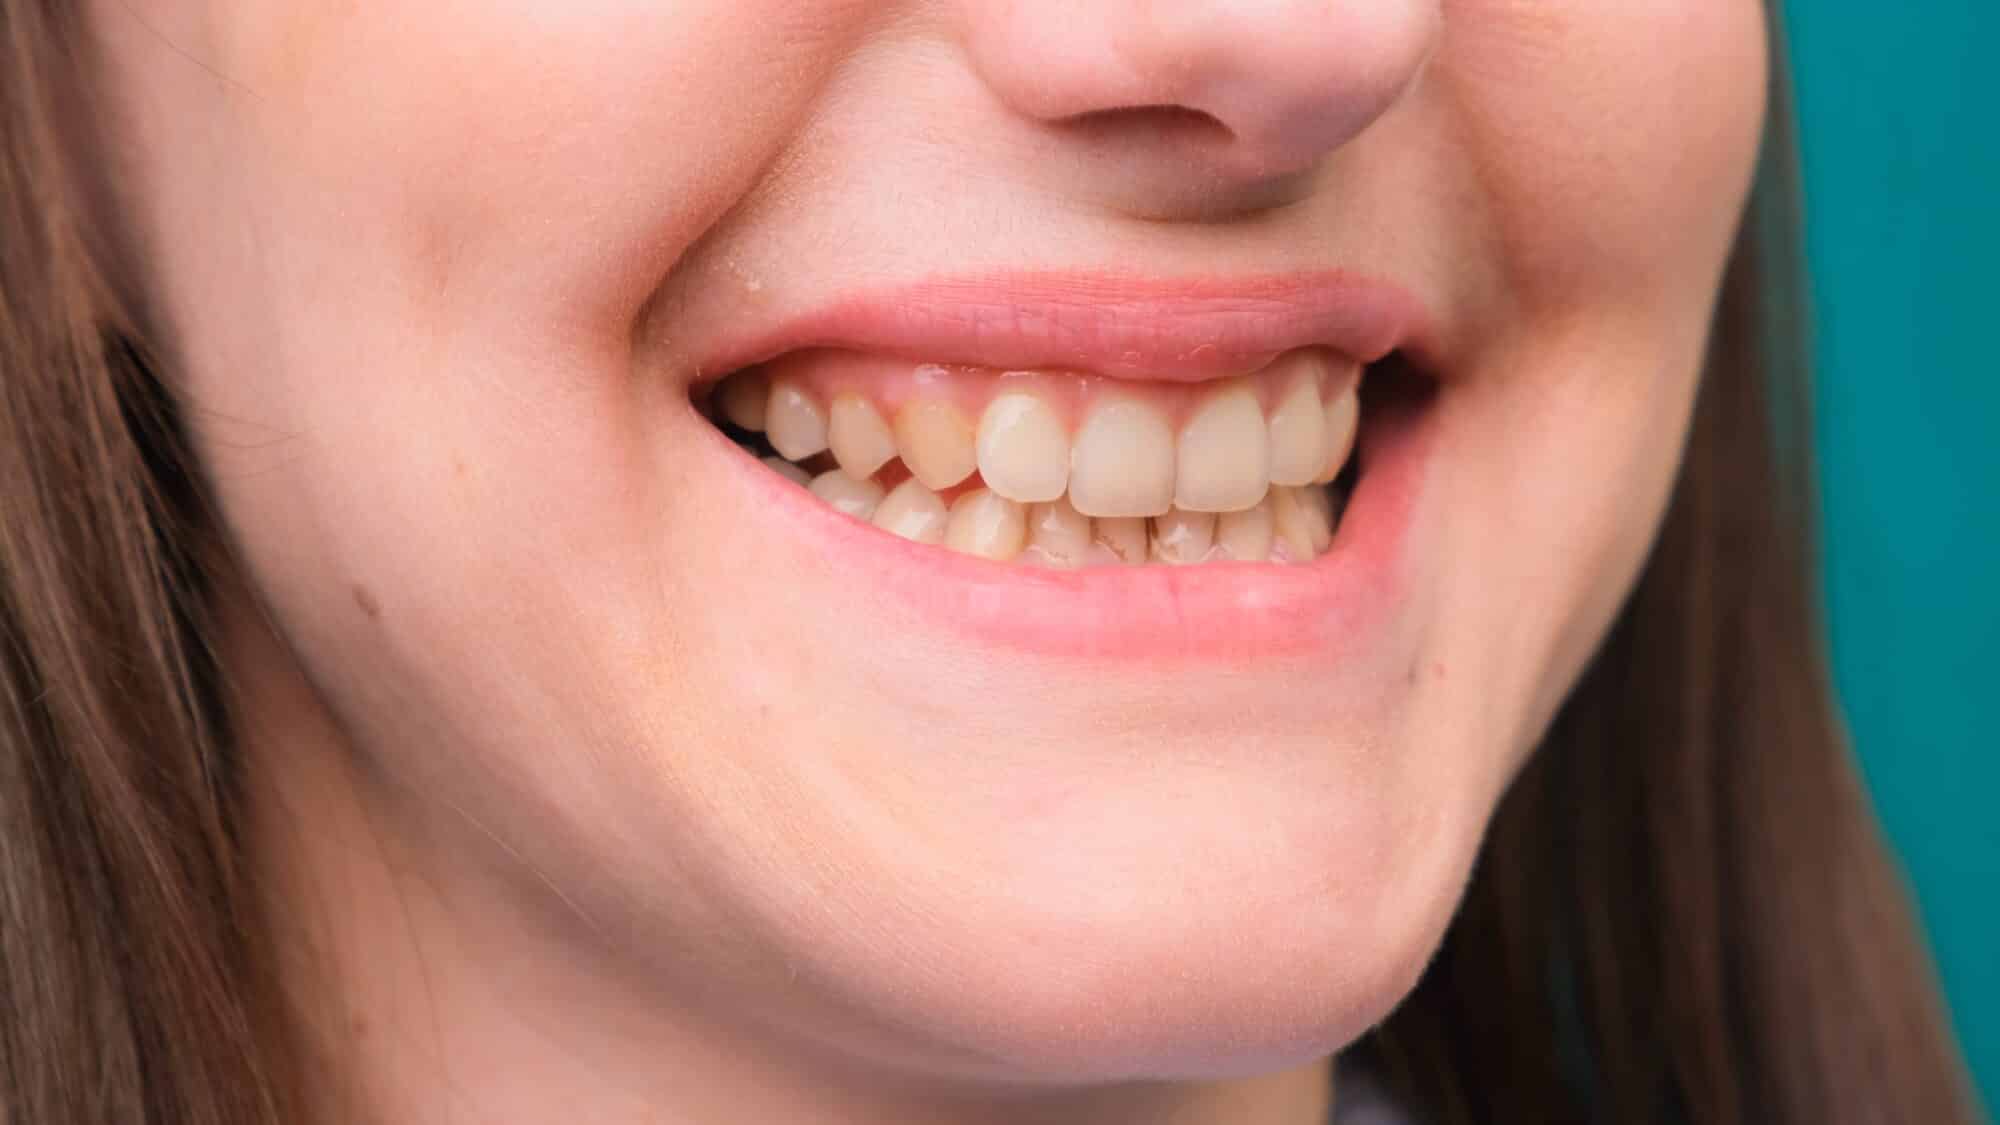 smoker's stained teeth needs cosmetic dentistry wilmington nc